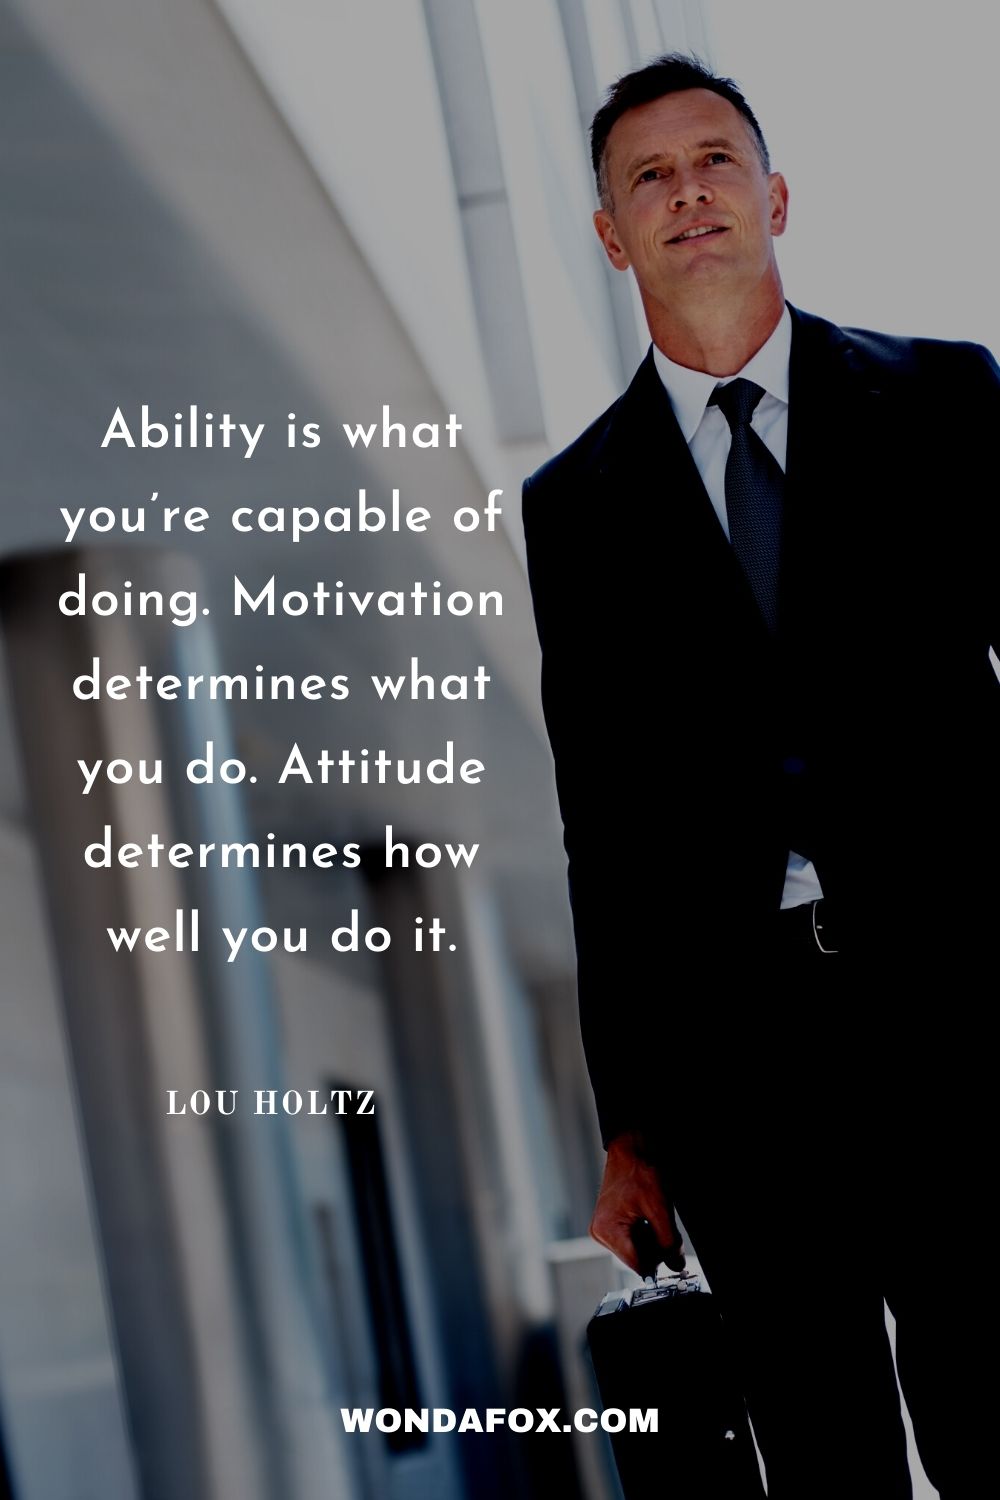 Ability is what you’re capable of doing. Motivation determines what you do. Attitude determines how well you do it.